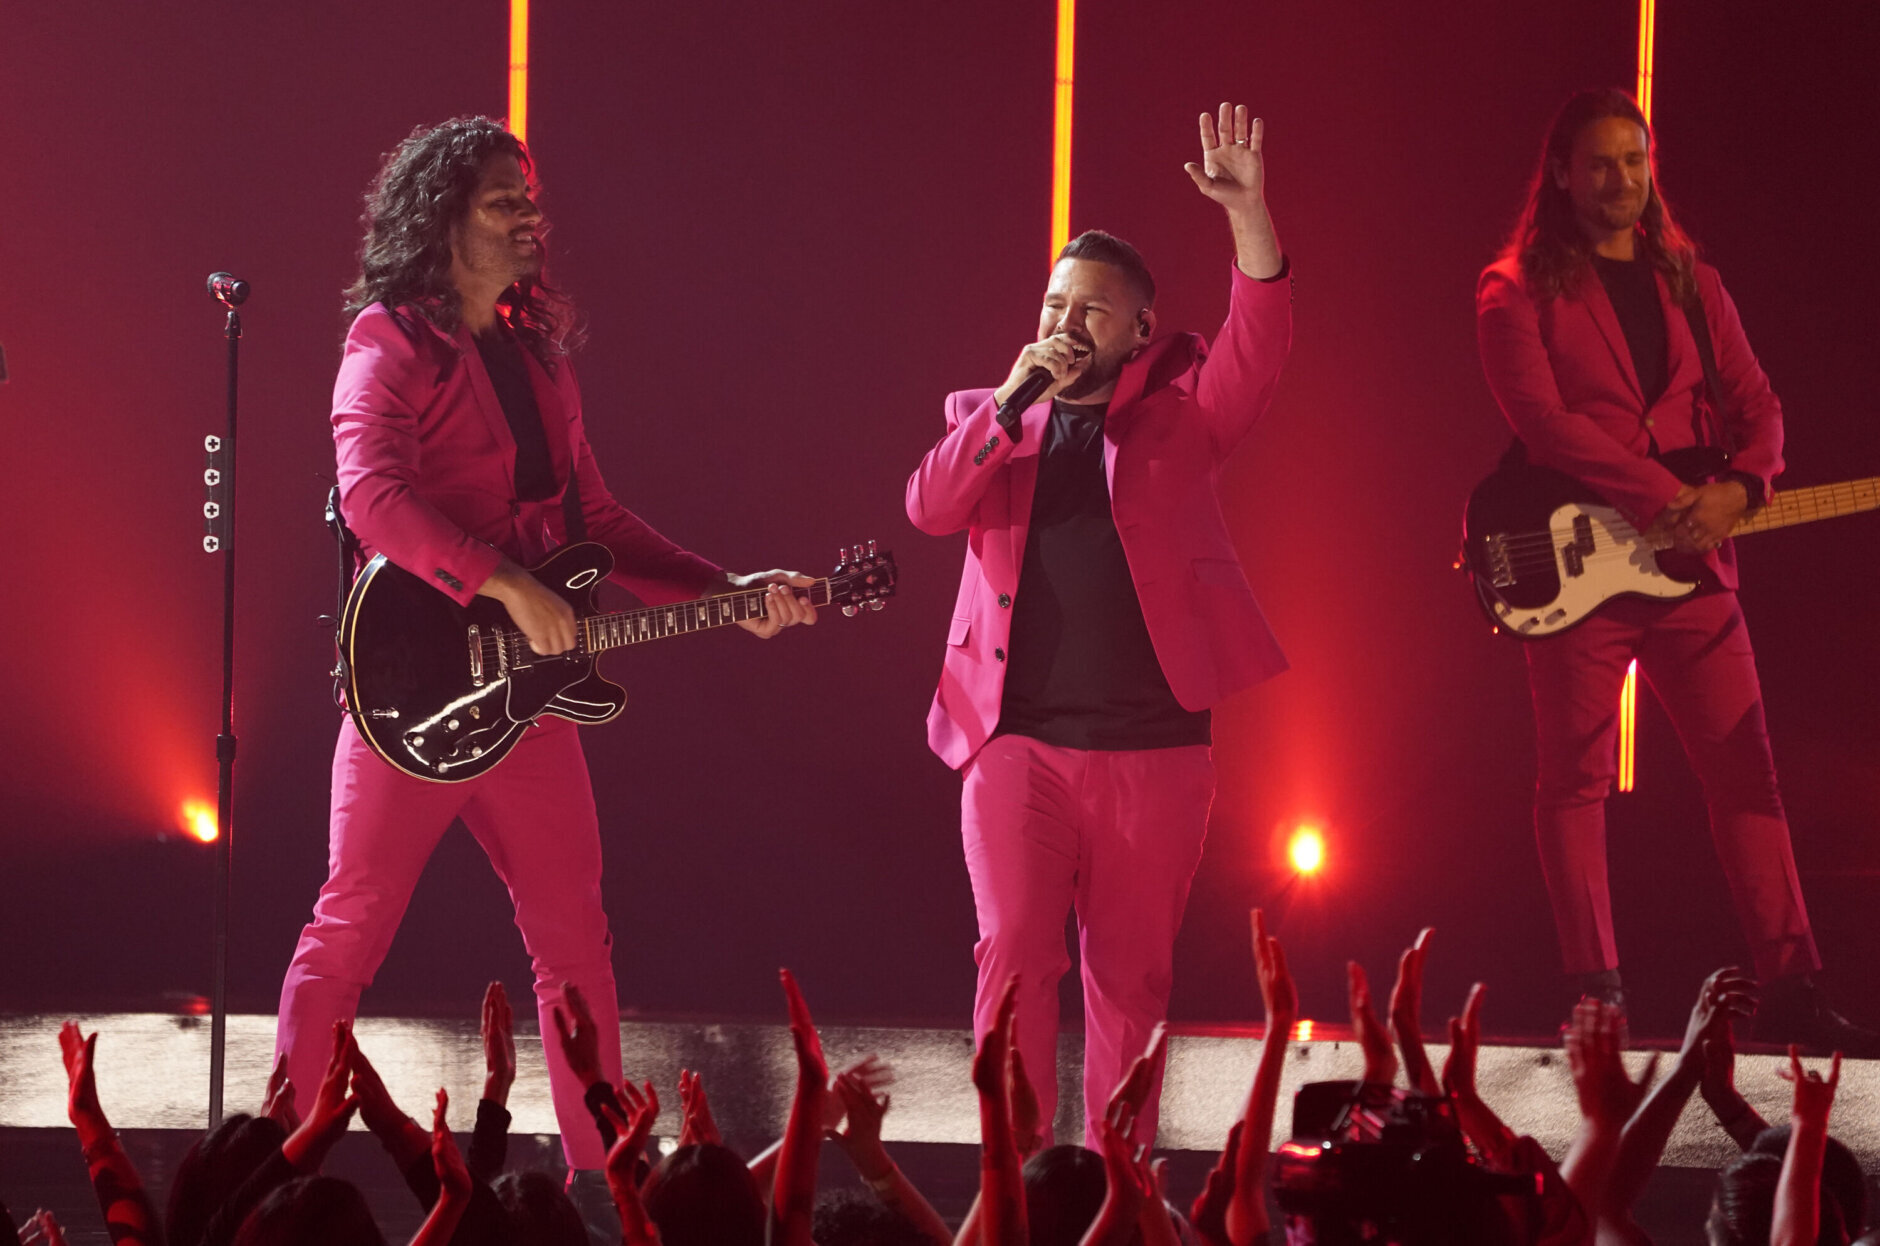 Dan Smyers, left, and Shay Mooney, of Dan + Shay, perform "You" at the Billboard Music Awards on Sunday, May 15, 2022, at the MGM Grand Garden Arena in Las Vegas. (AP Photo/Chris Pizzello)